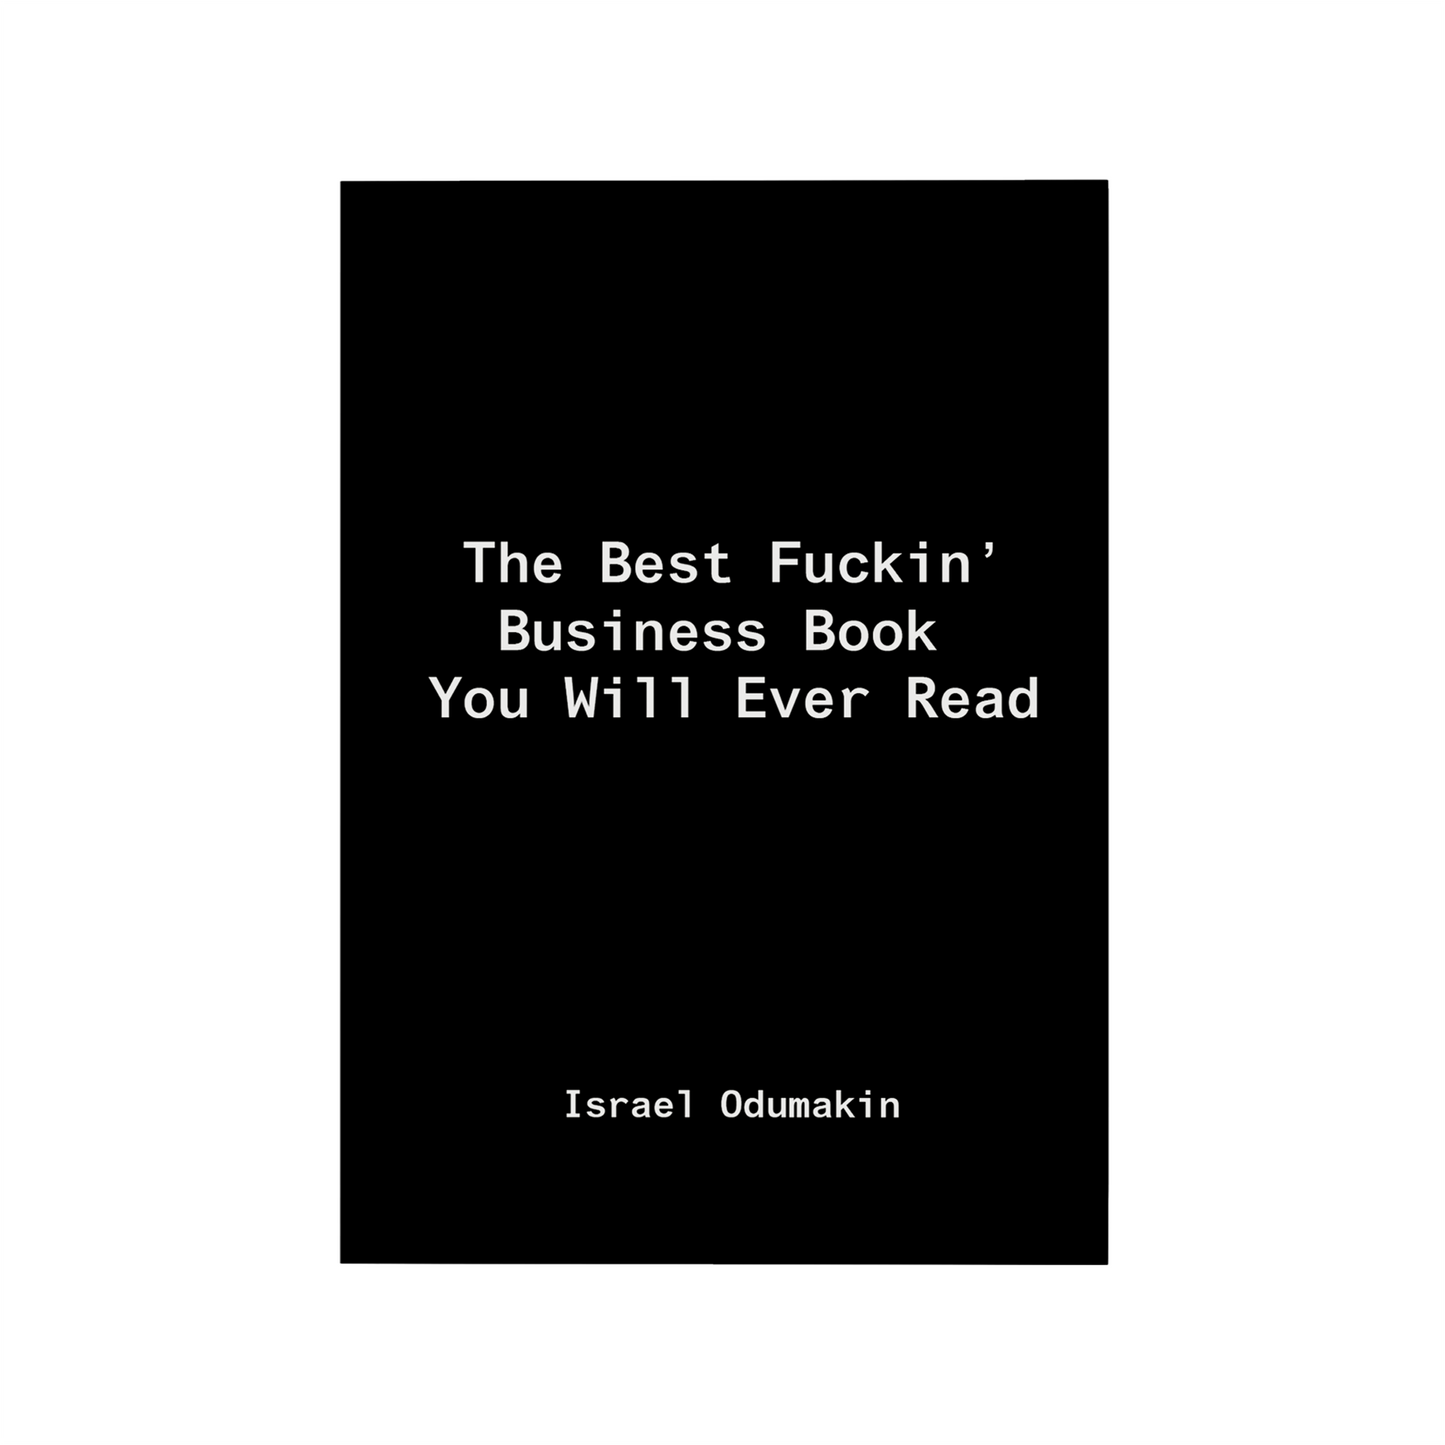 The Best Fuckin' Business Book You Will Ever Read